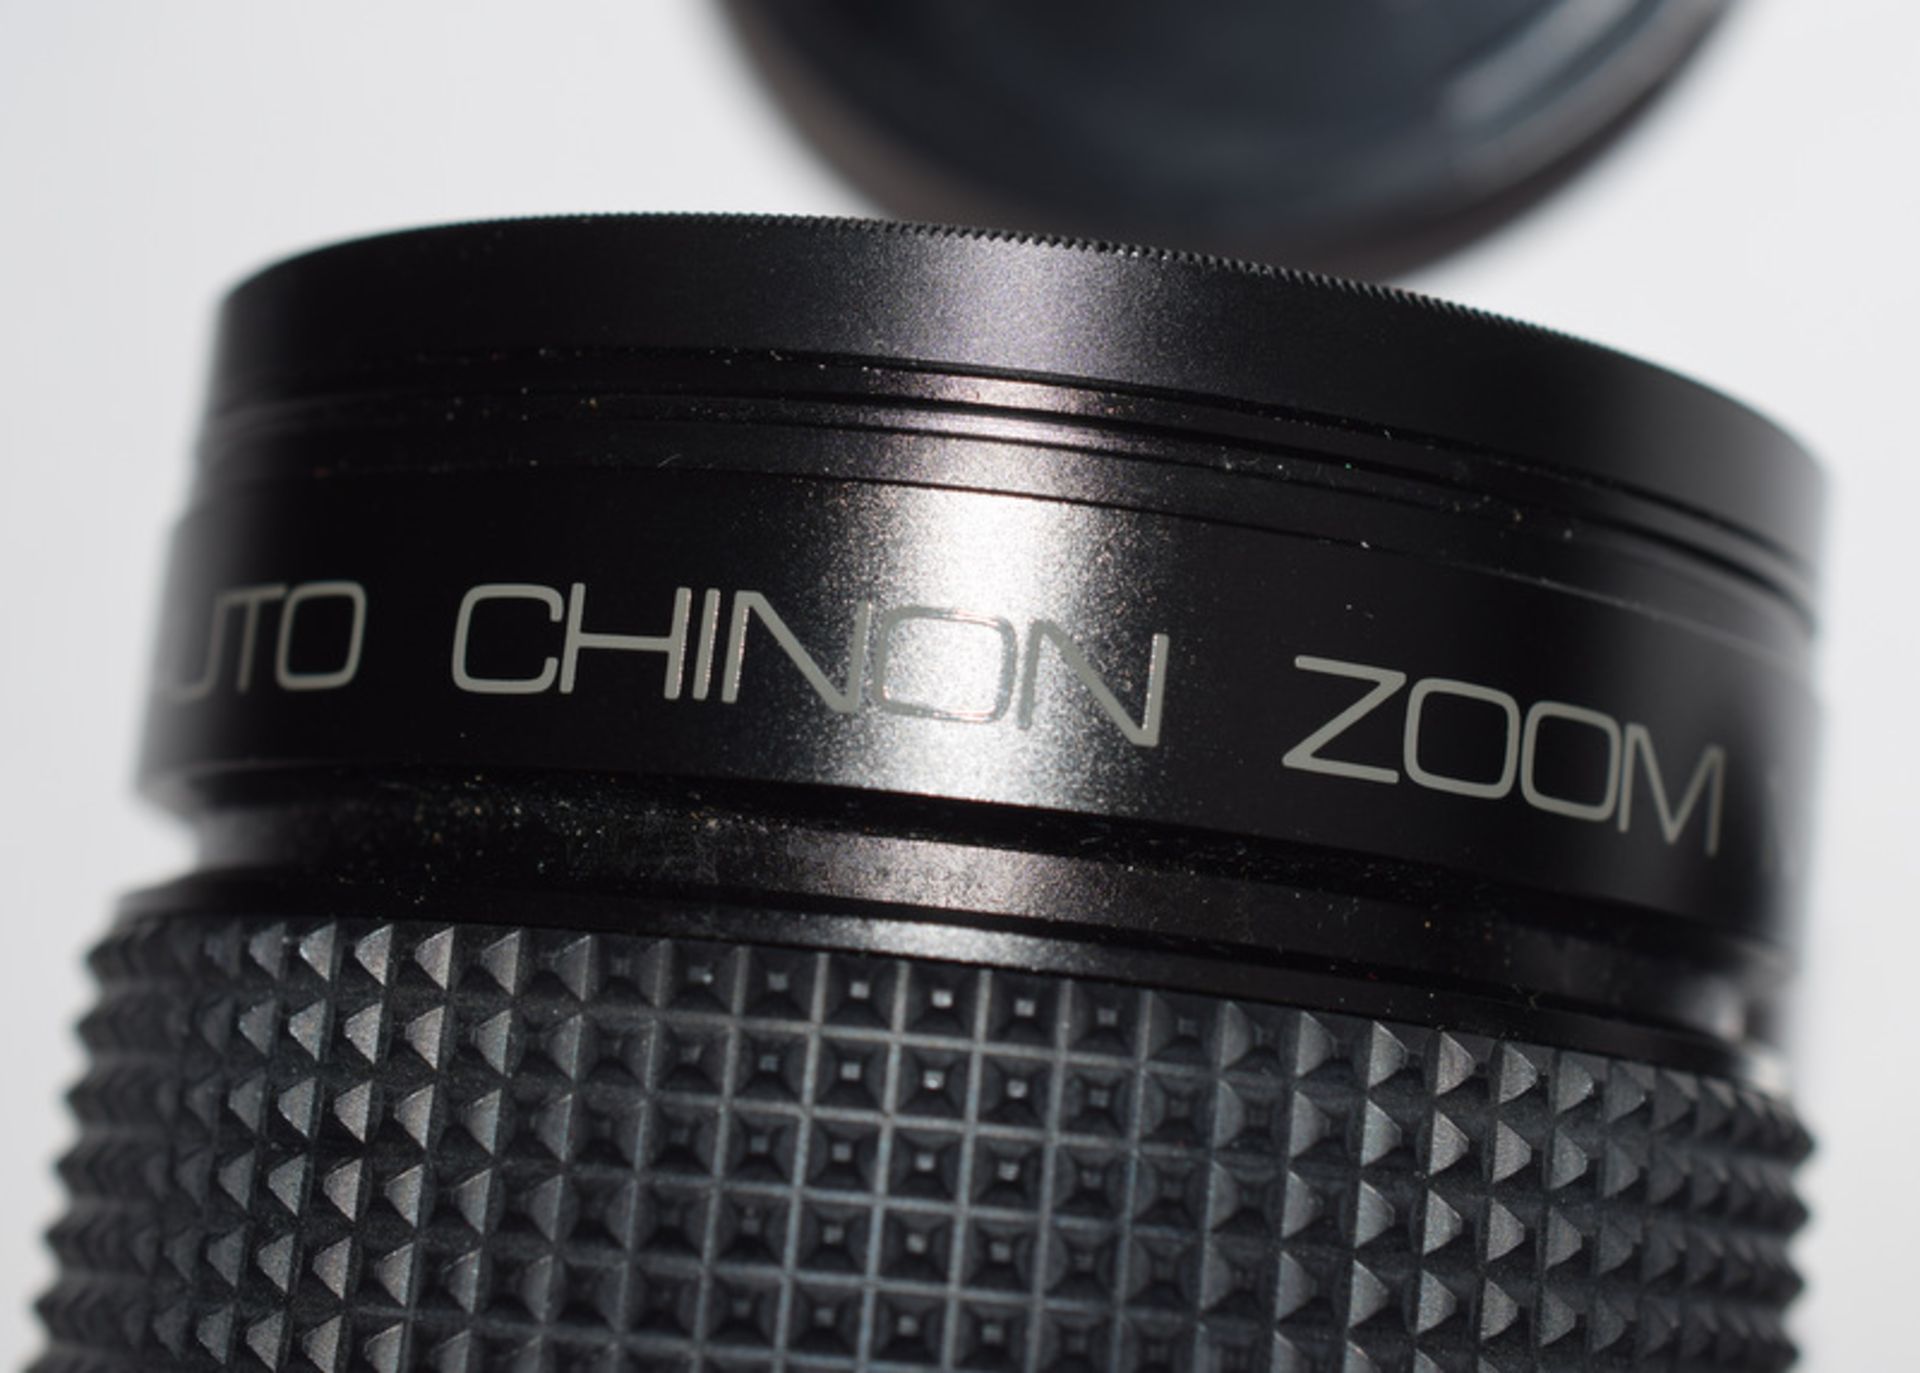 Auto Chinon Zoom Lens In Soft Case - Image 3 of 4